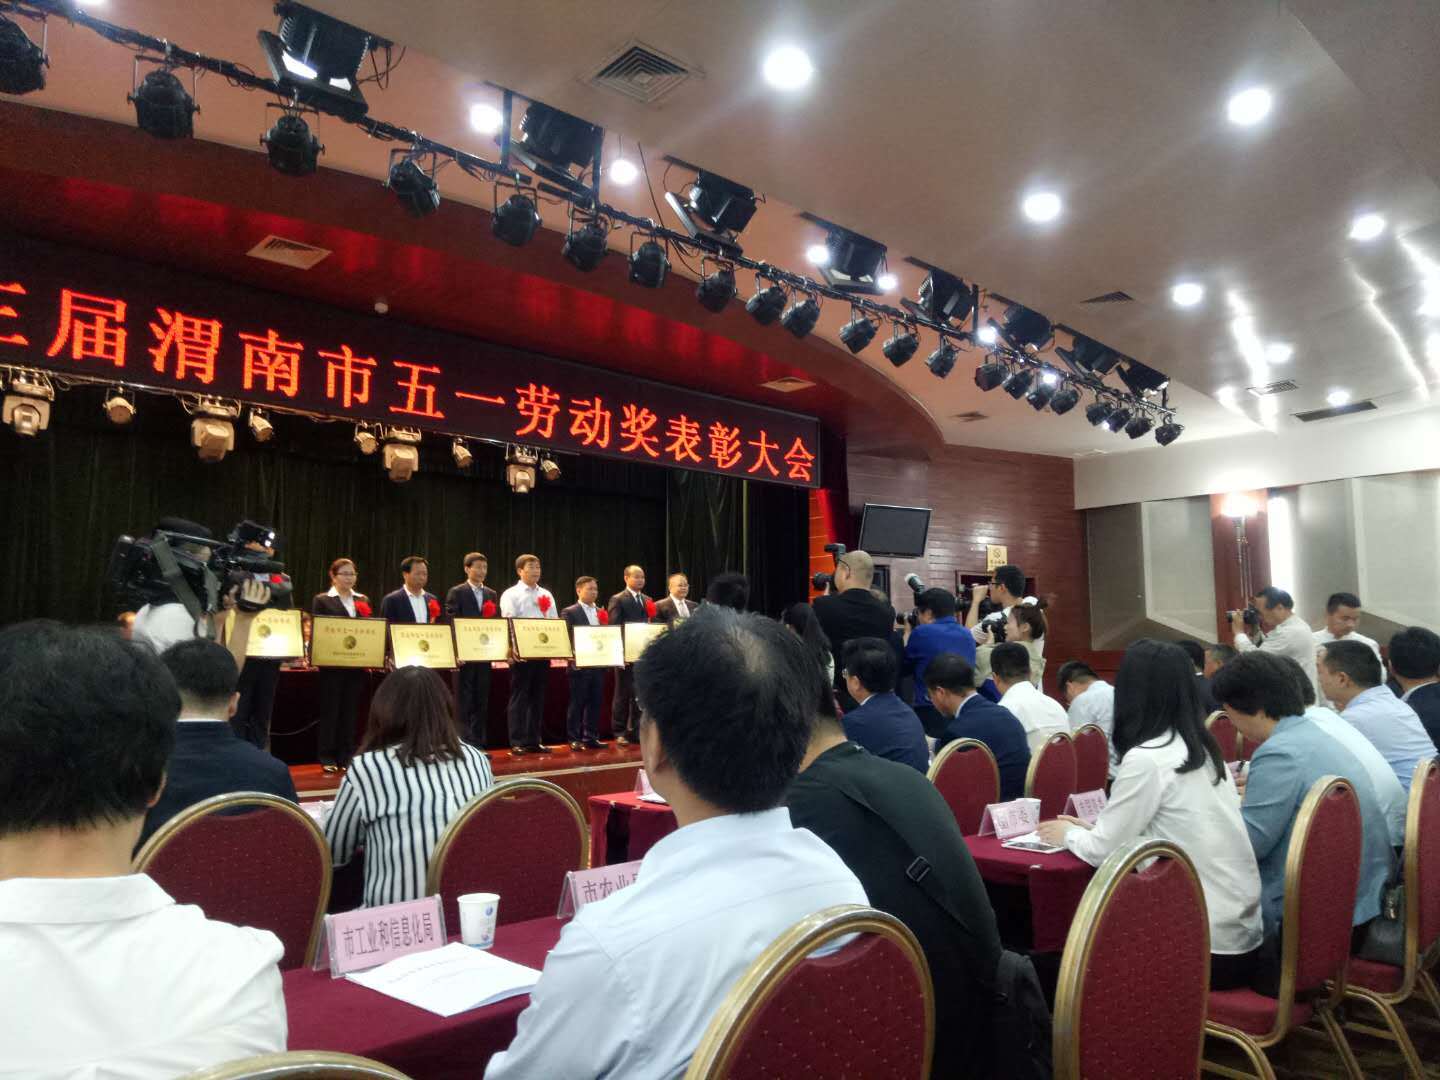 Our company won the May 1st Labor Award of Weinan City